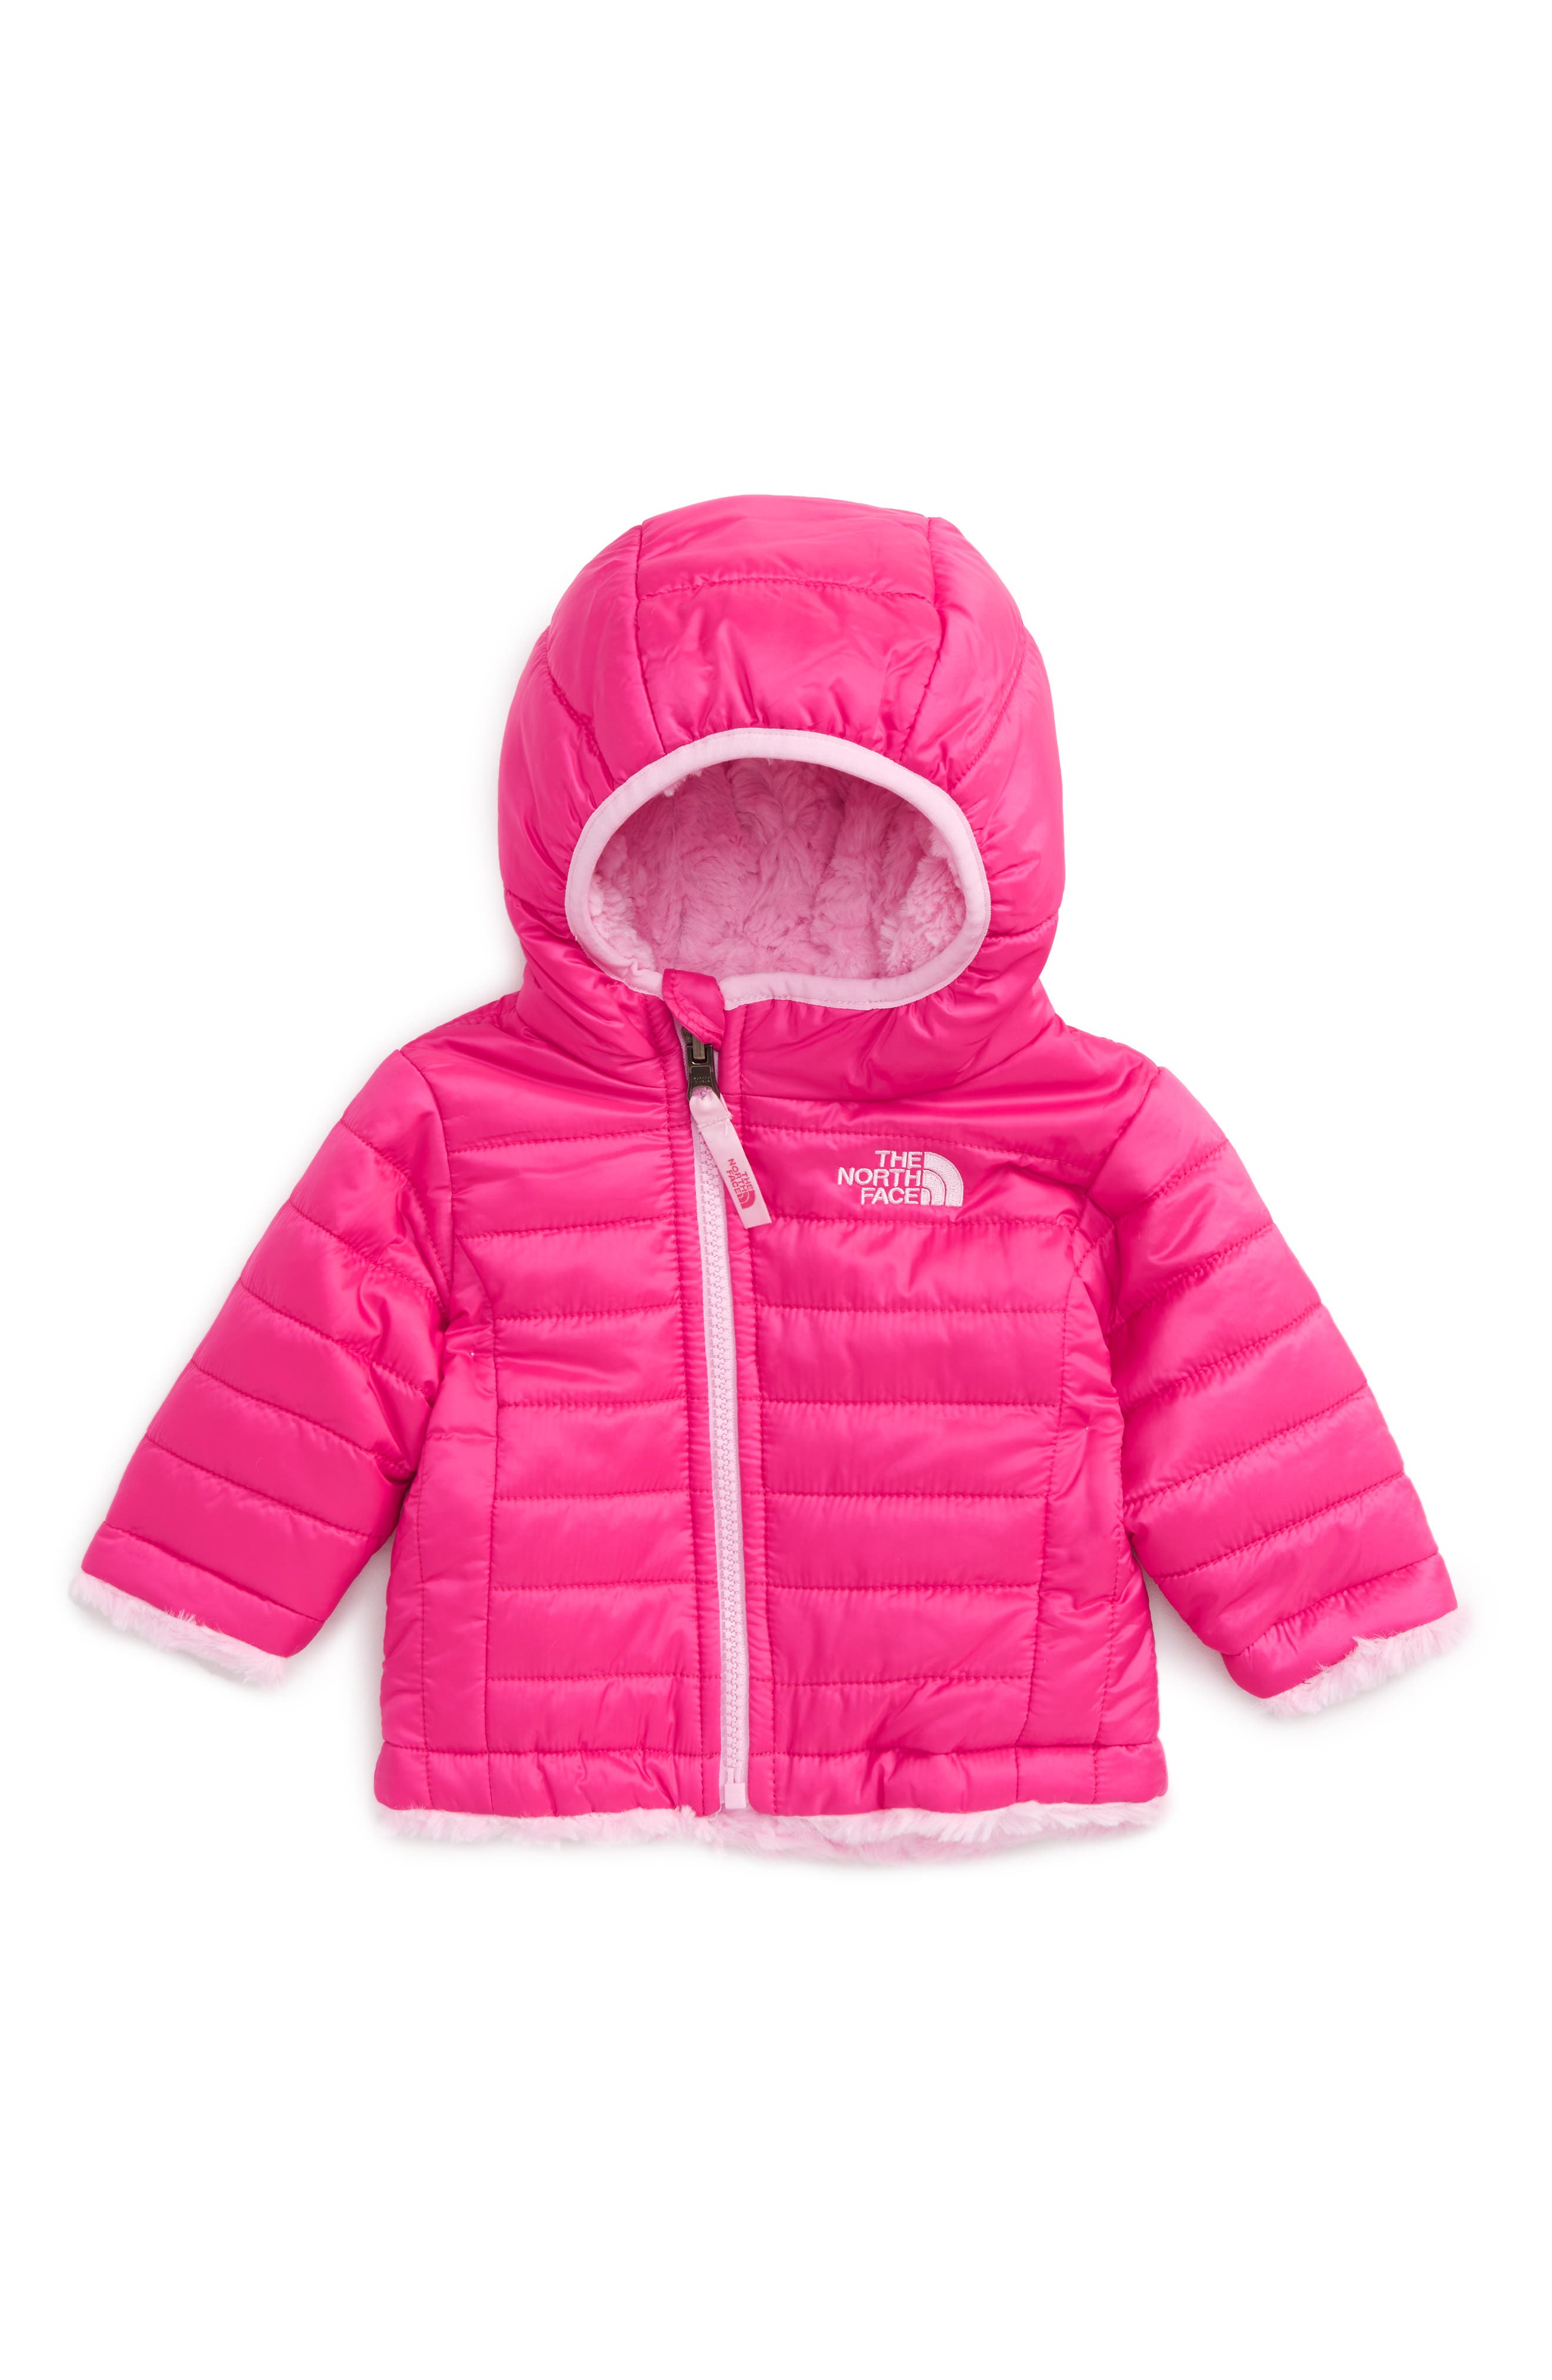 The North Face for Baby Girl | Nordstrom